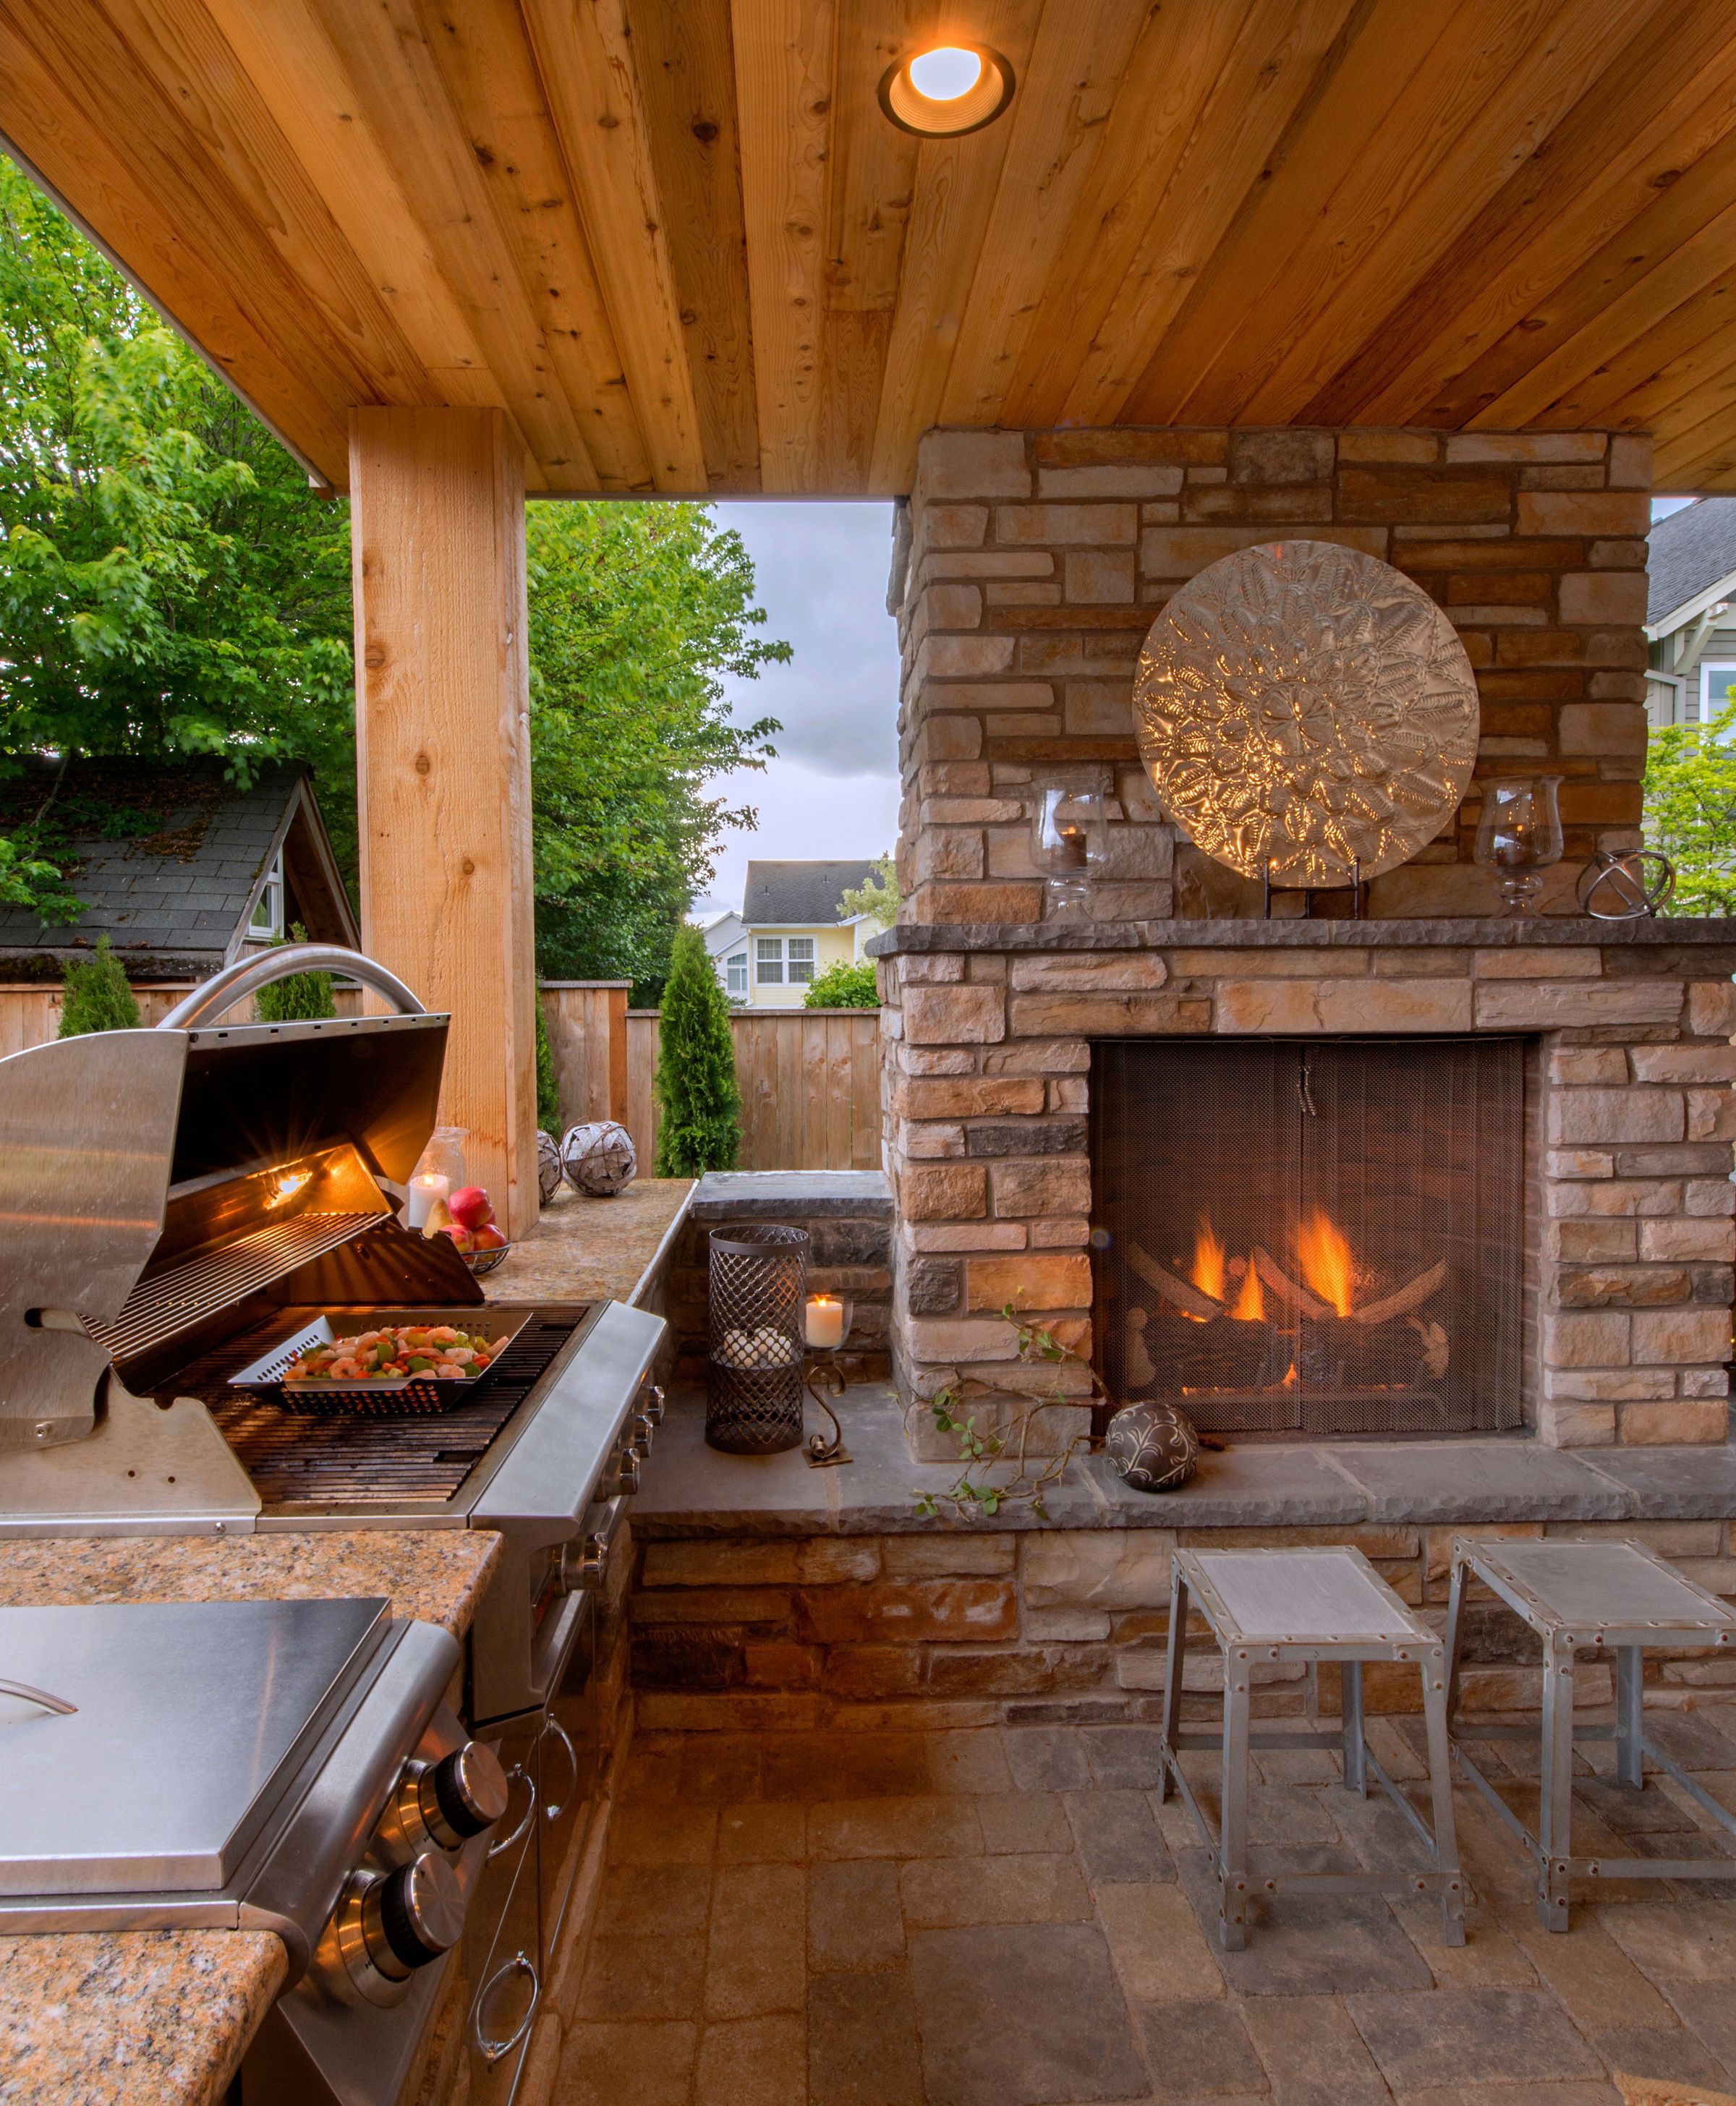 Patio Stone Fireplace Lovely 40 Best Outdoor Kitchen Design and Ideas In 2019